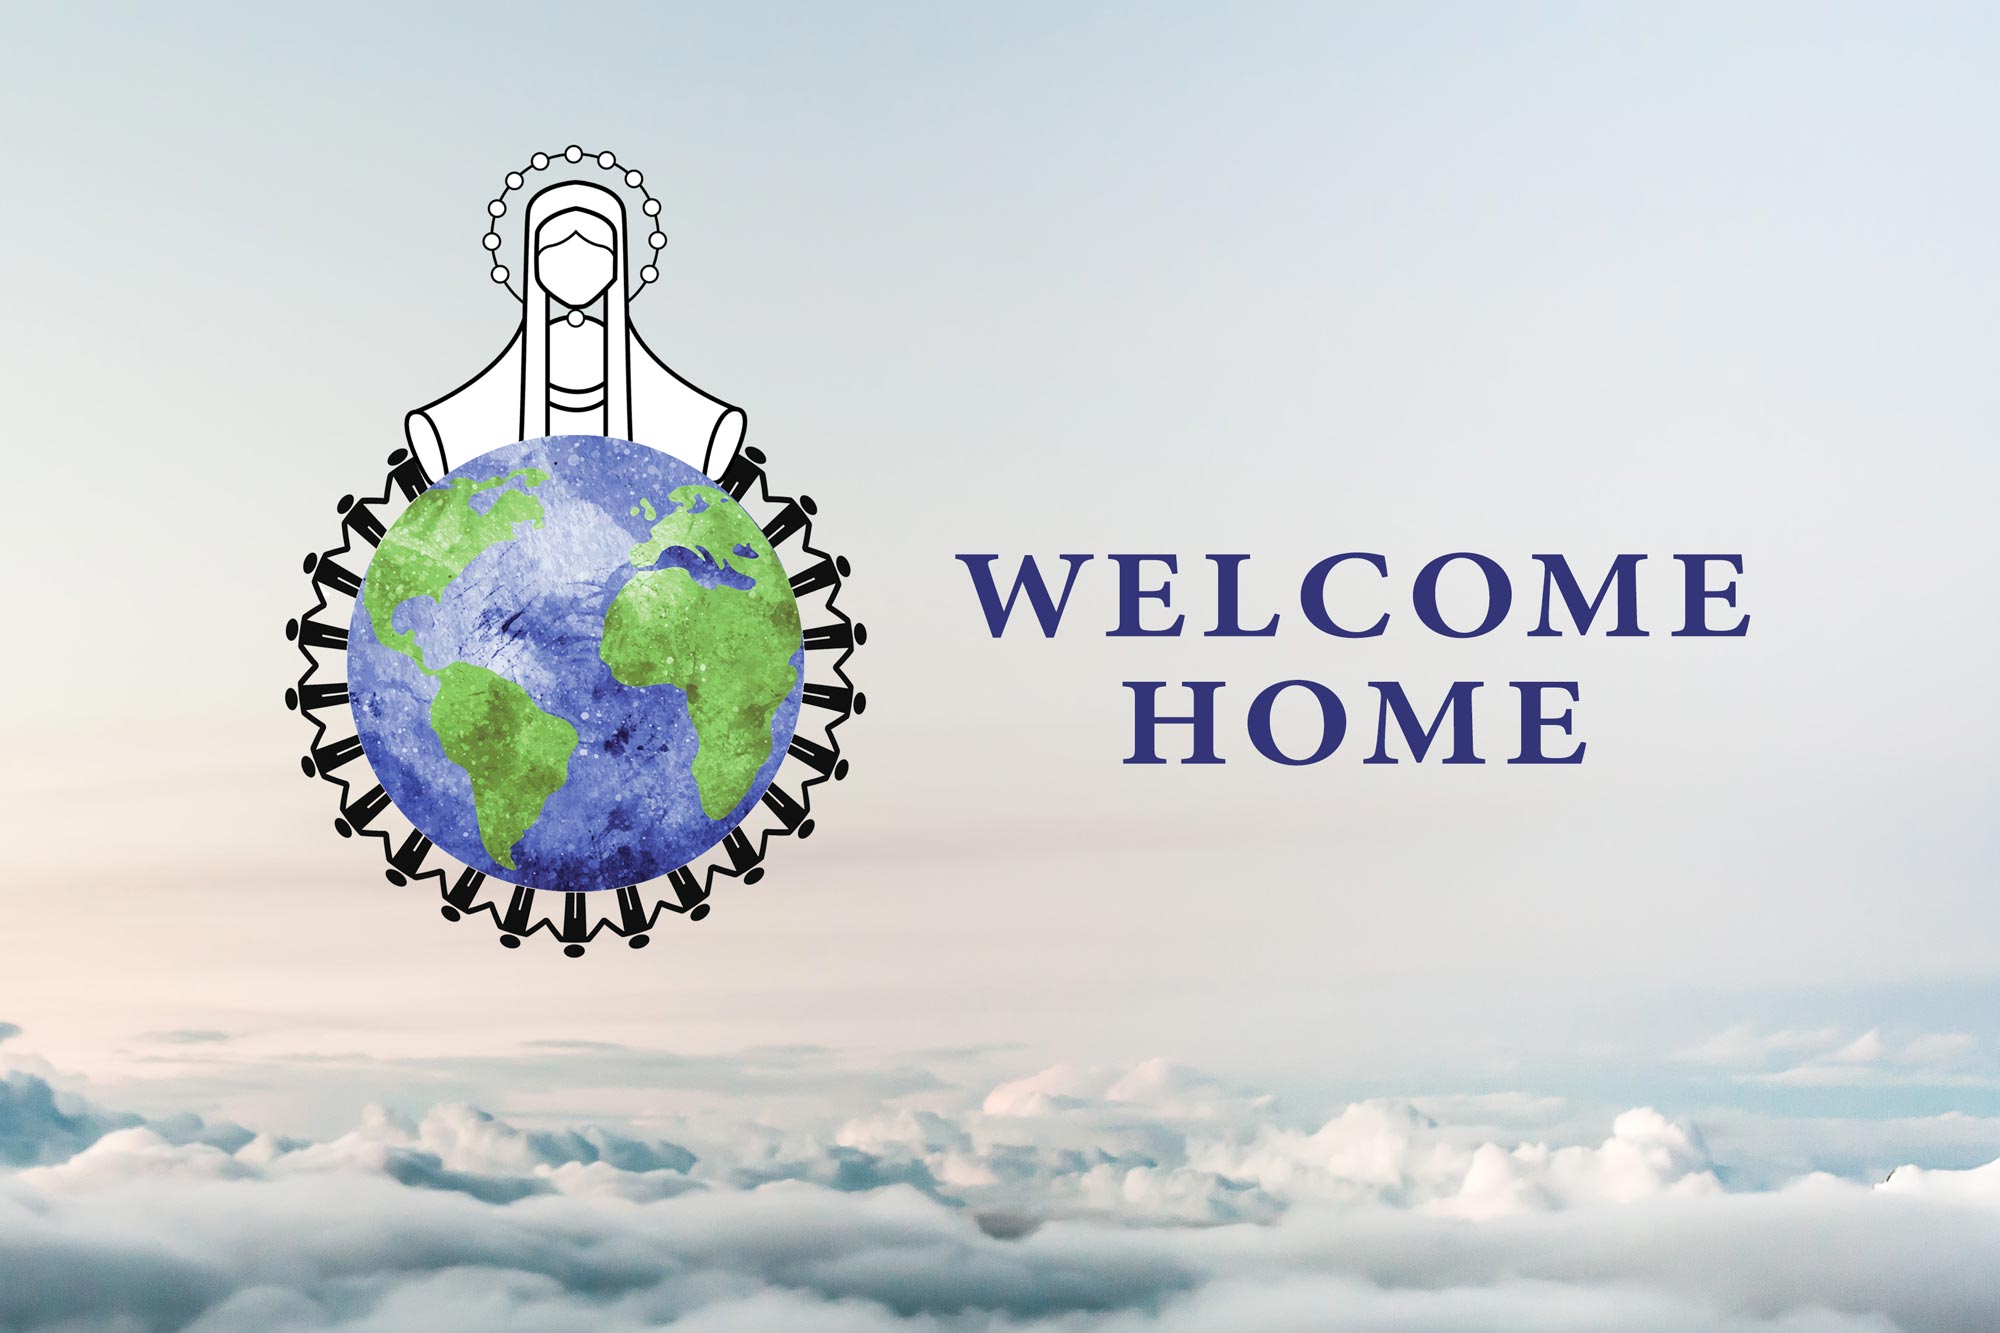 Welcome Home logo with clouds in background